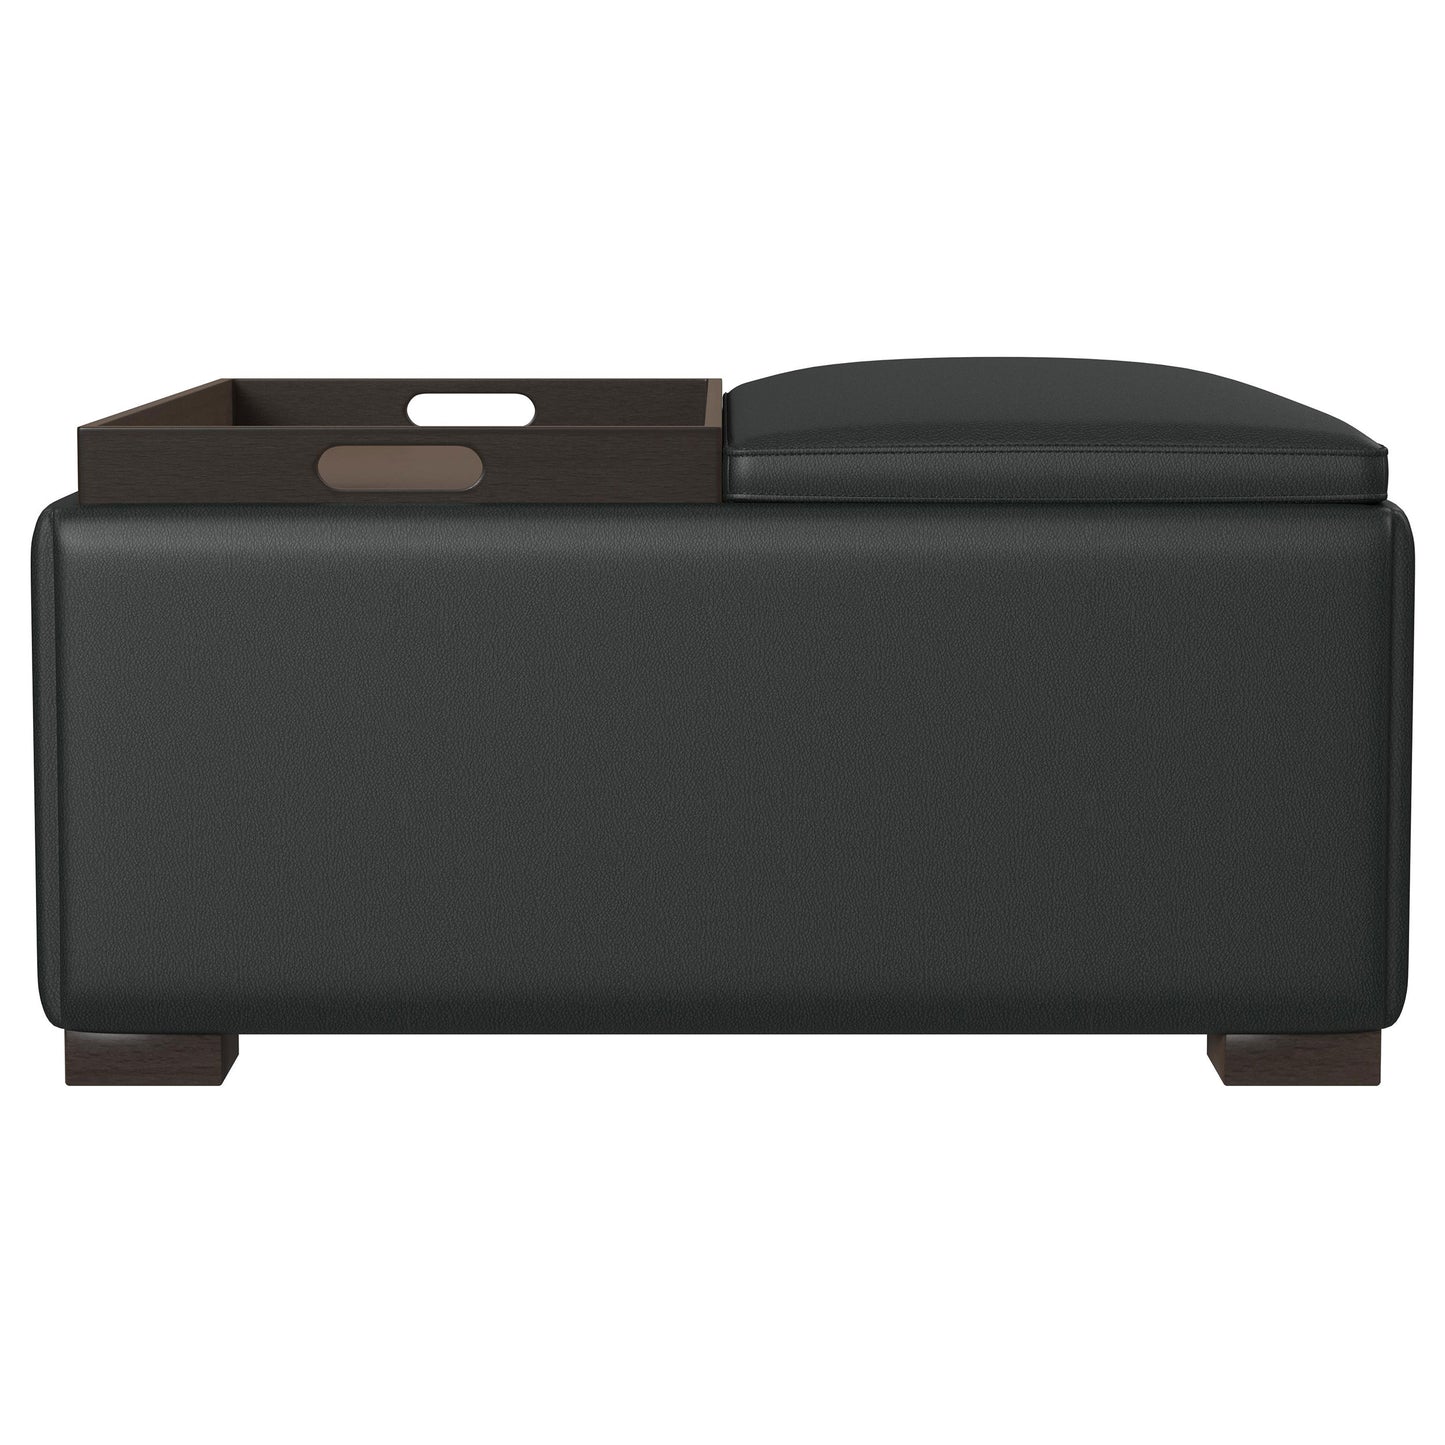 Paris Multifunctional Upholstered Storage Ottoman with Utility Tray Black